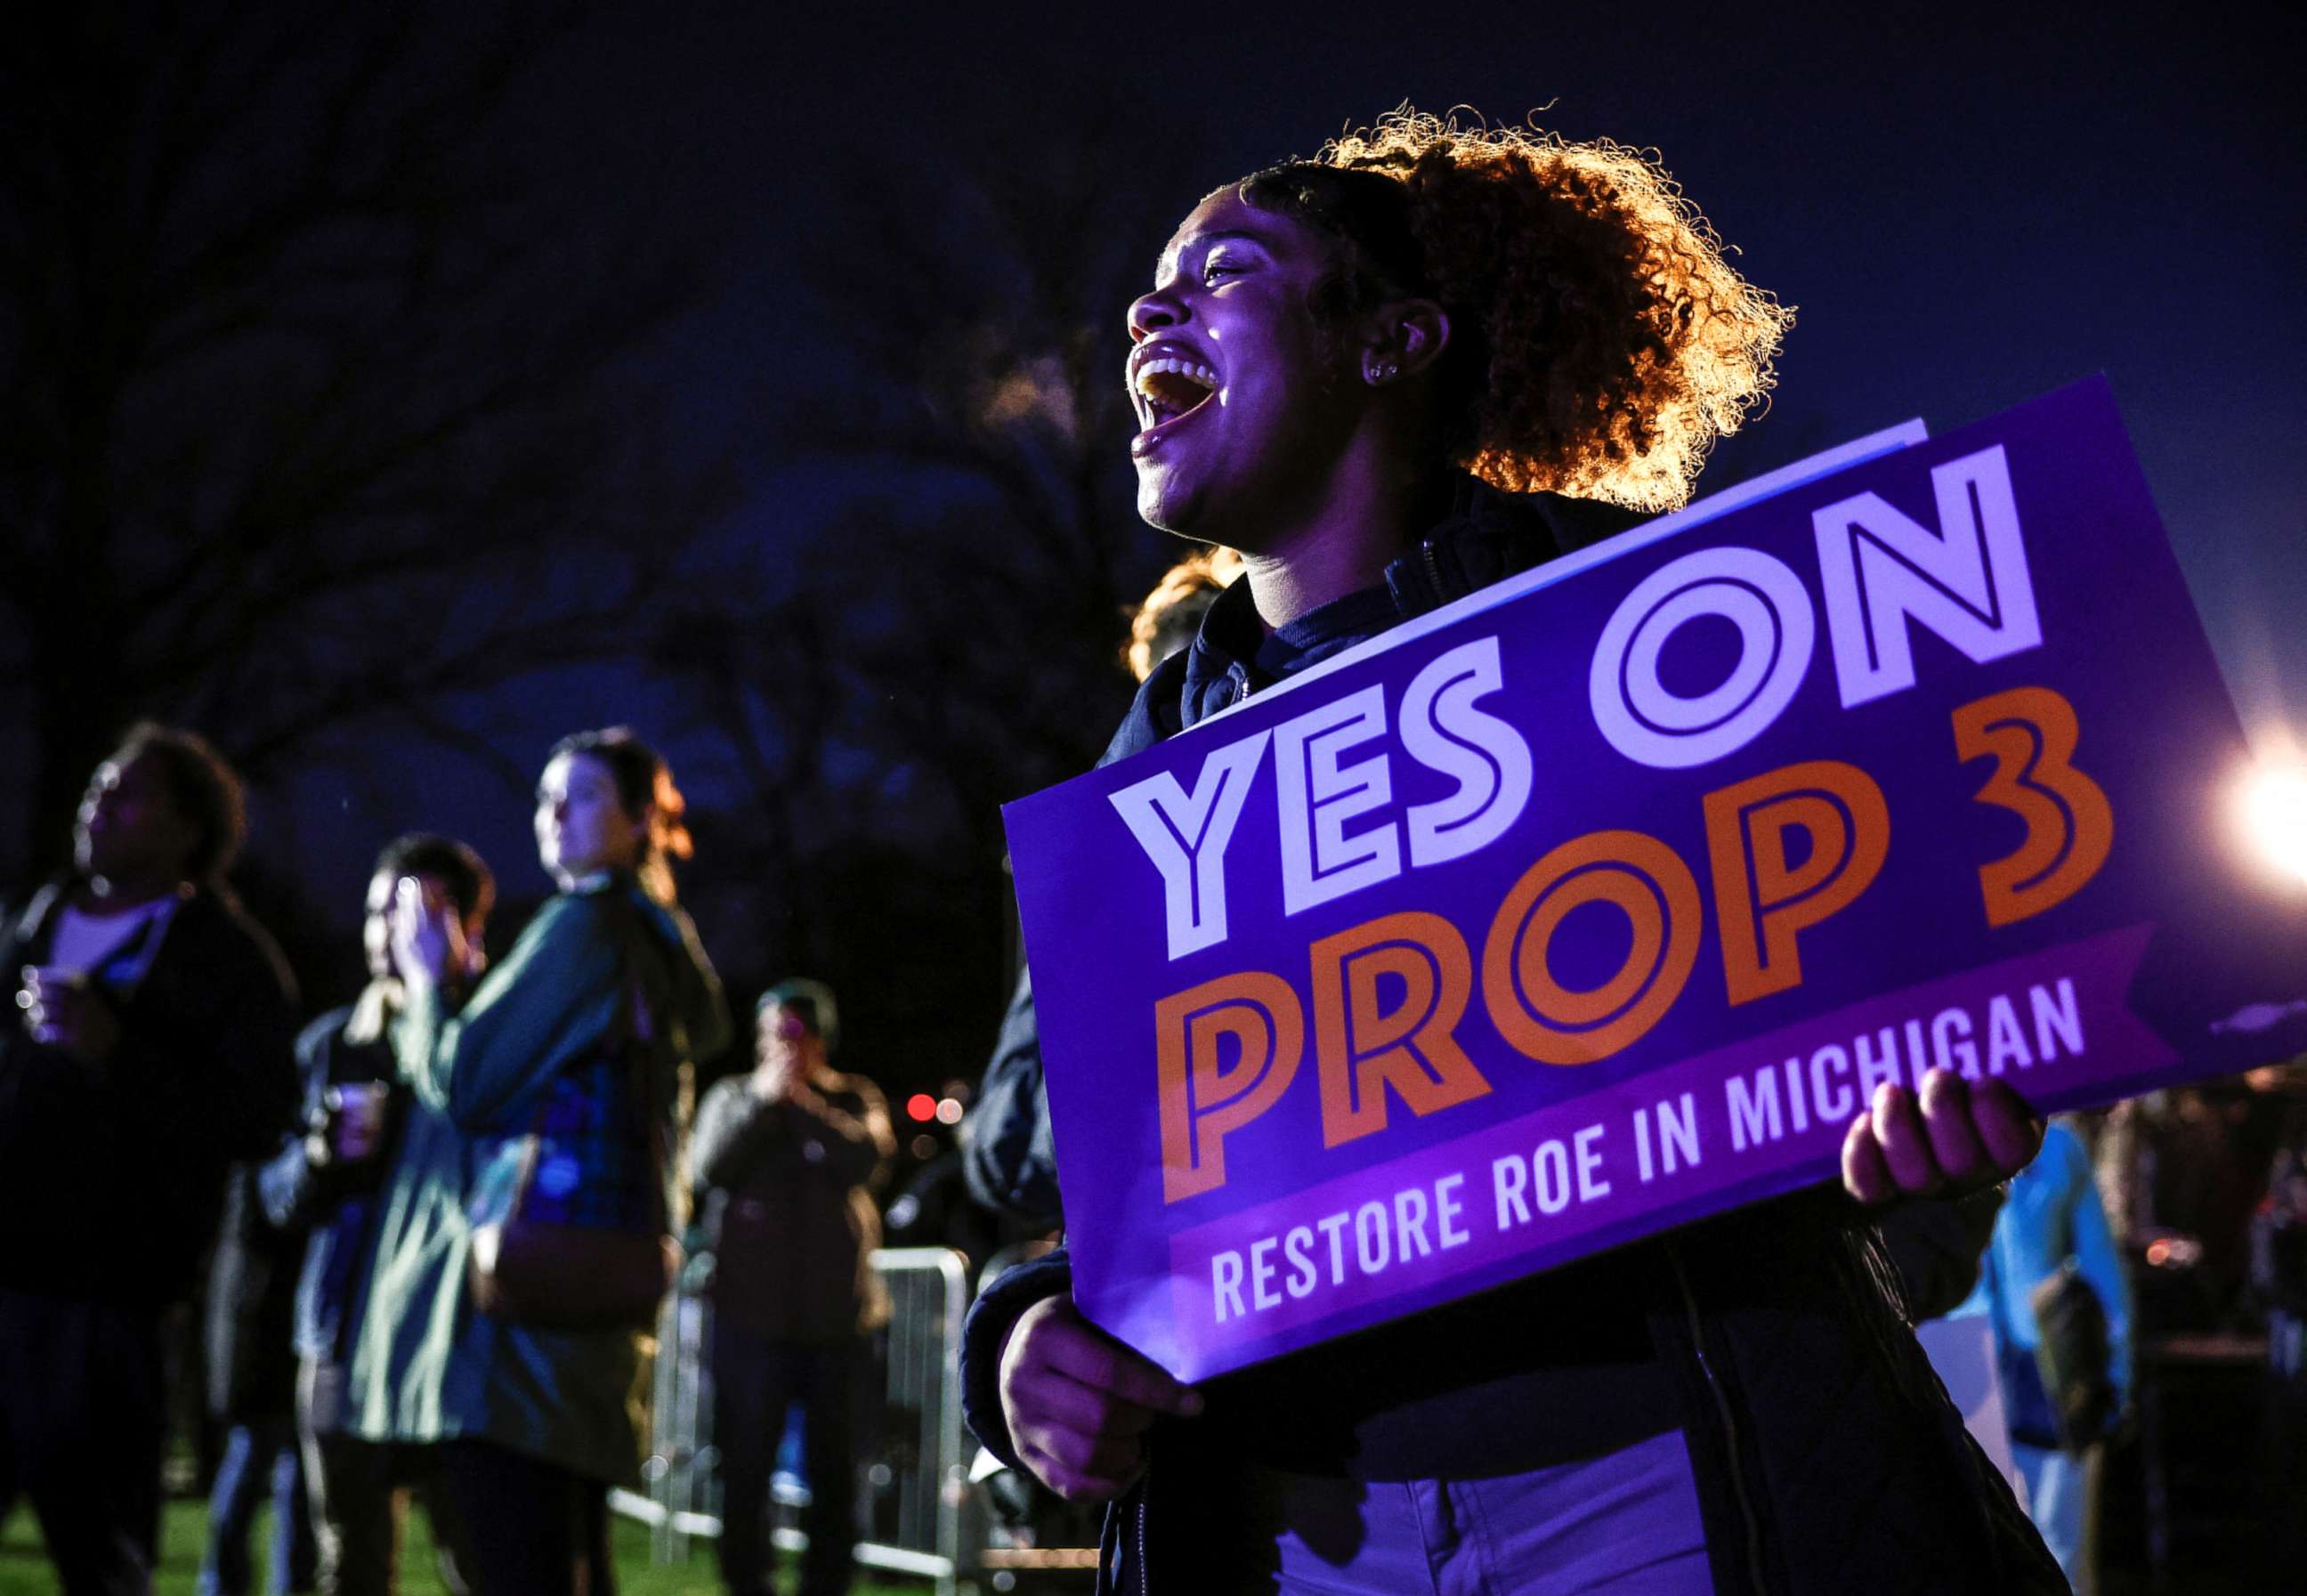 PHOTO: Jaelynn Smith, a freshman at Michigan State University, holds a sign in support of Proposal 3, a ballot measure which would codify abortion rights, during a 'get out the vote' rally at MSU, in East Lansing, Mich., Nov. 7, 2022.